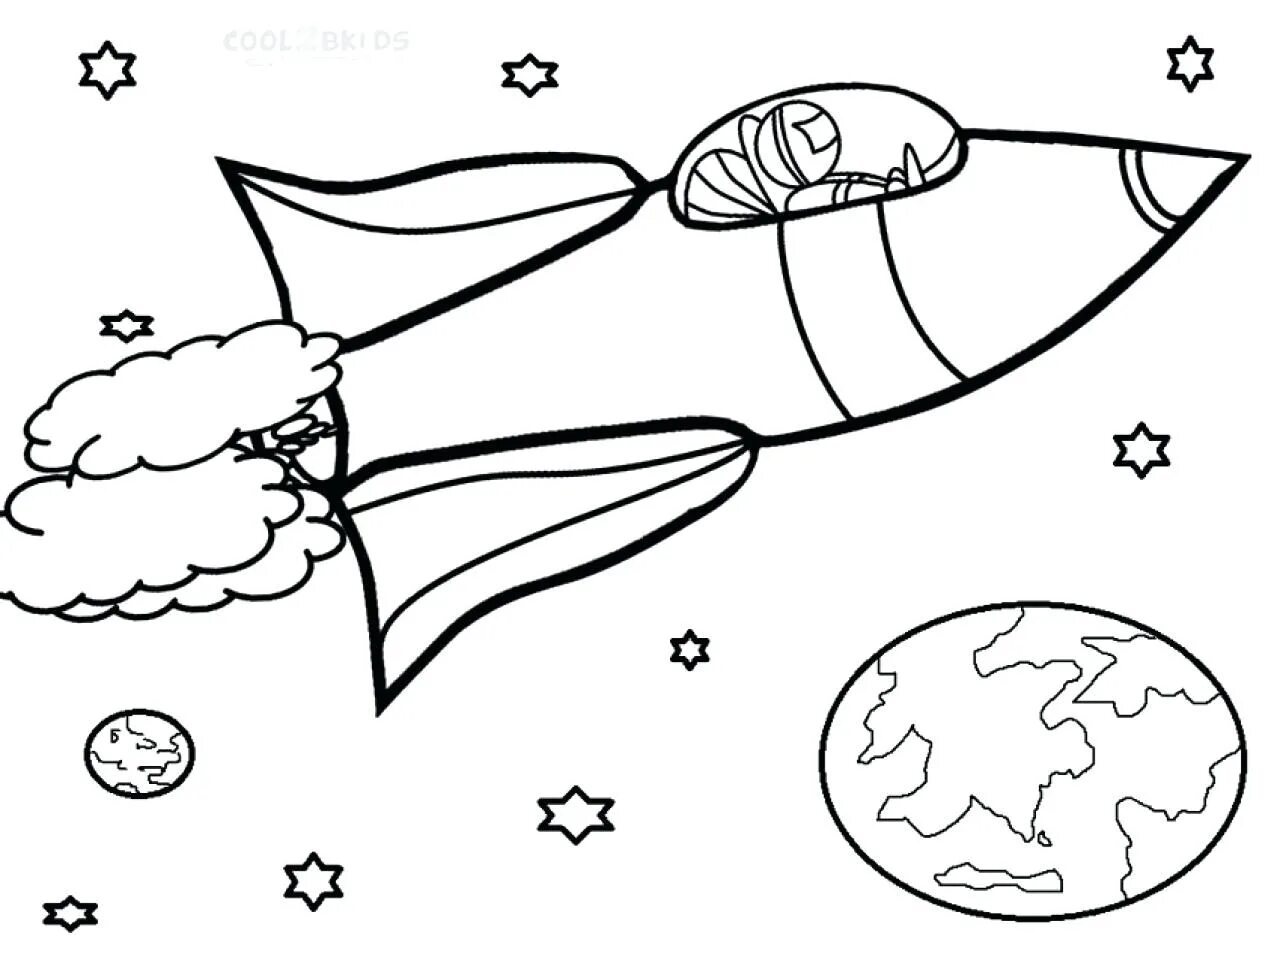 Coloring book amazing space 1st grade